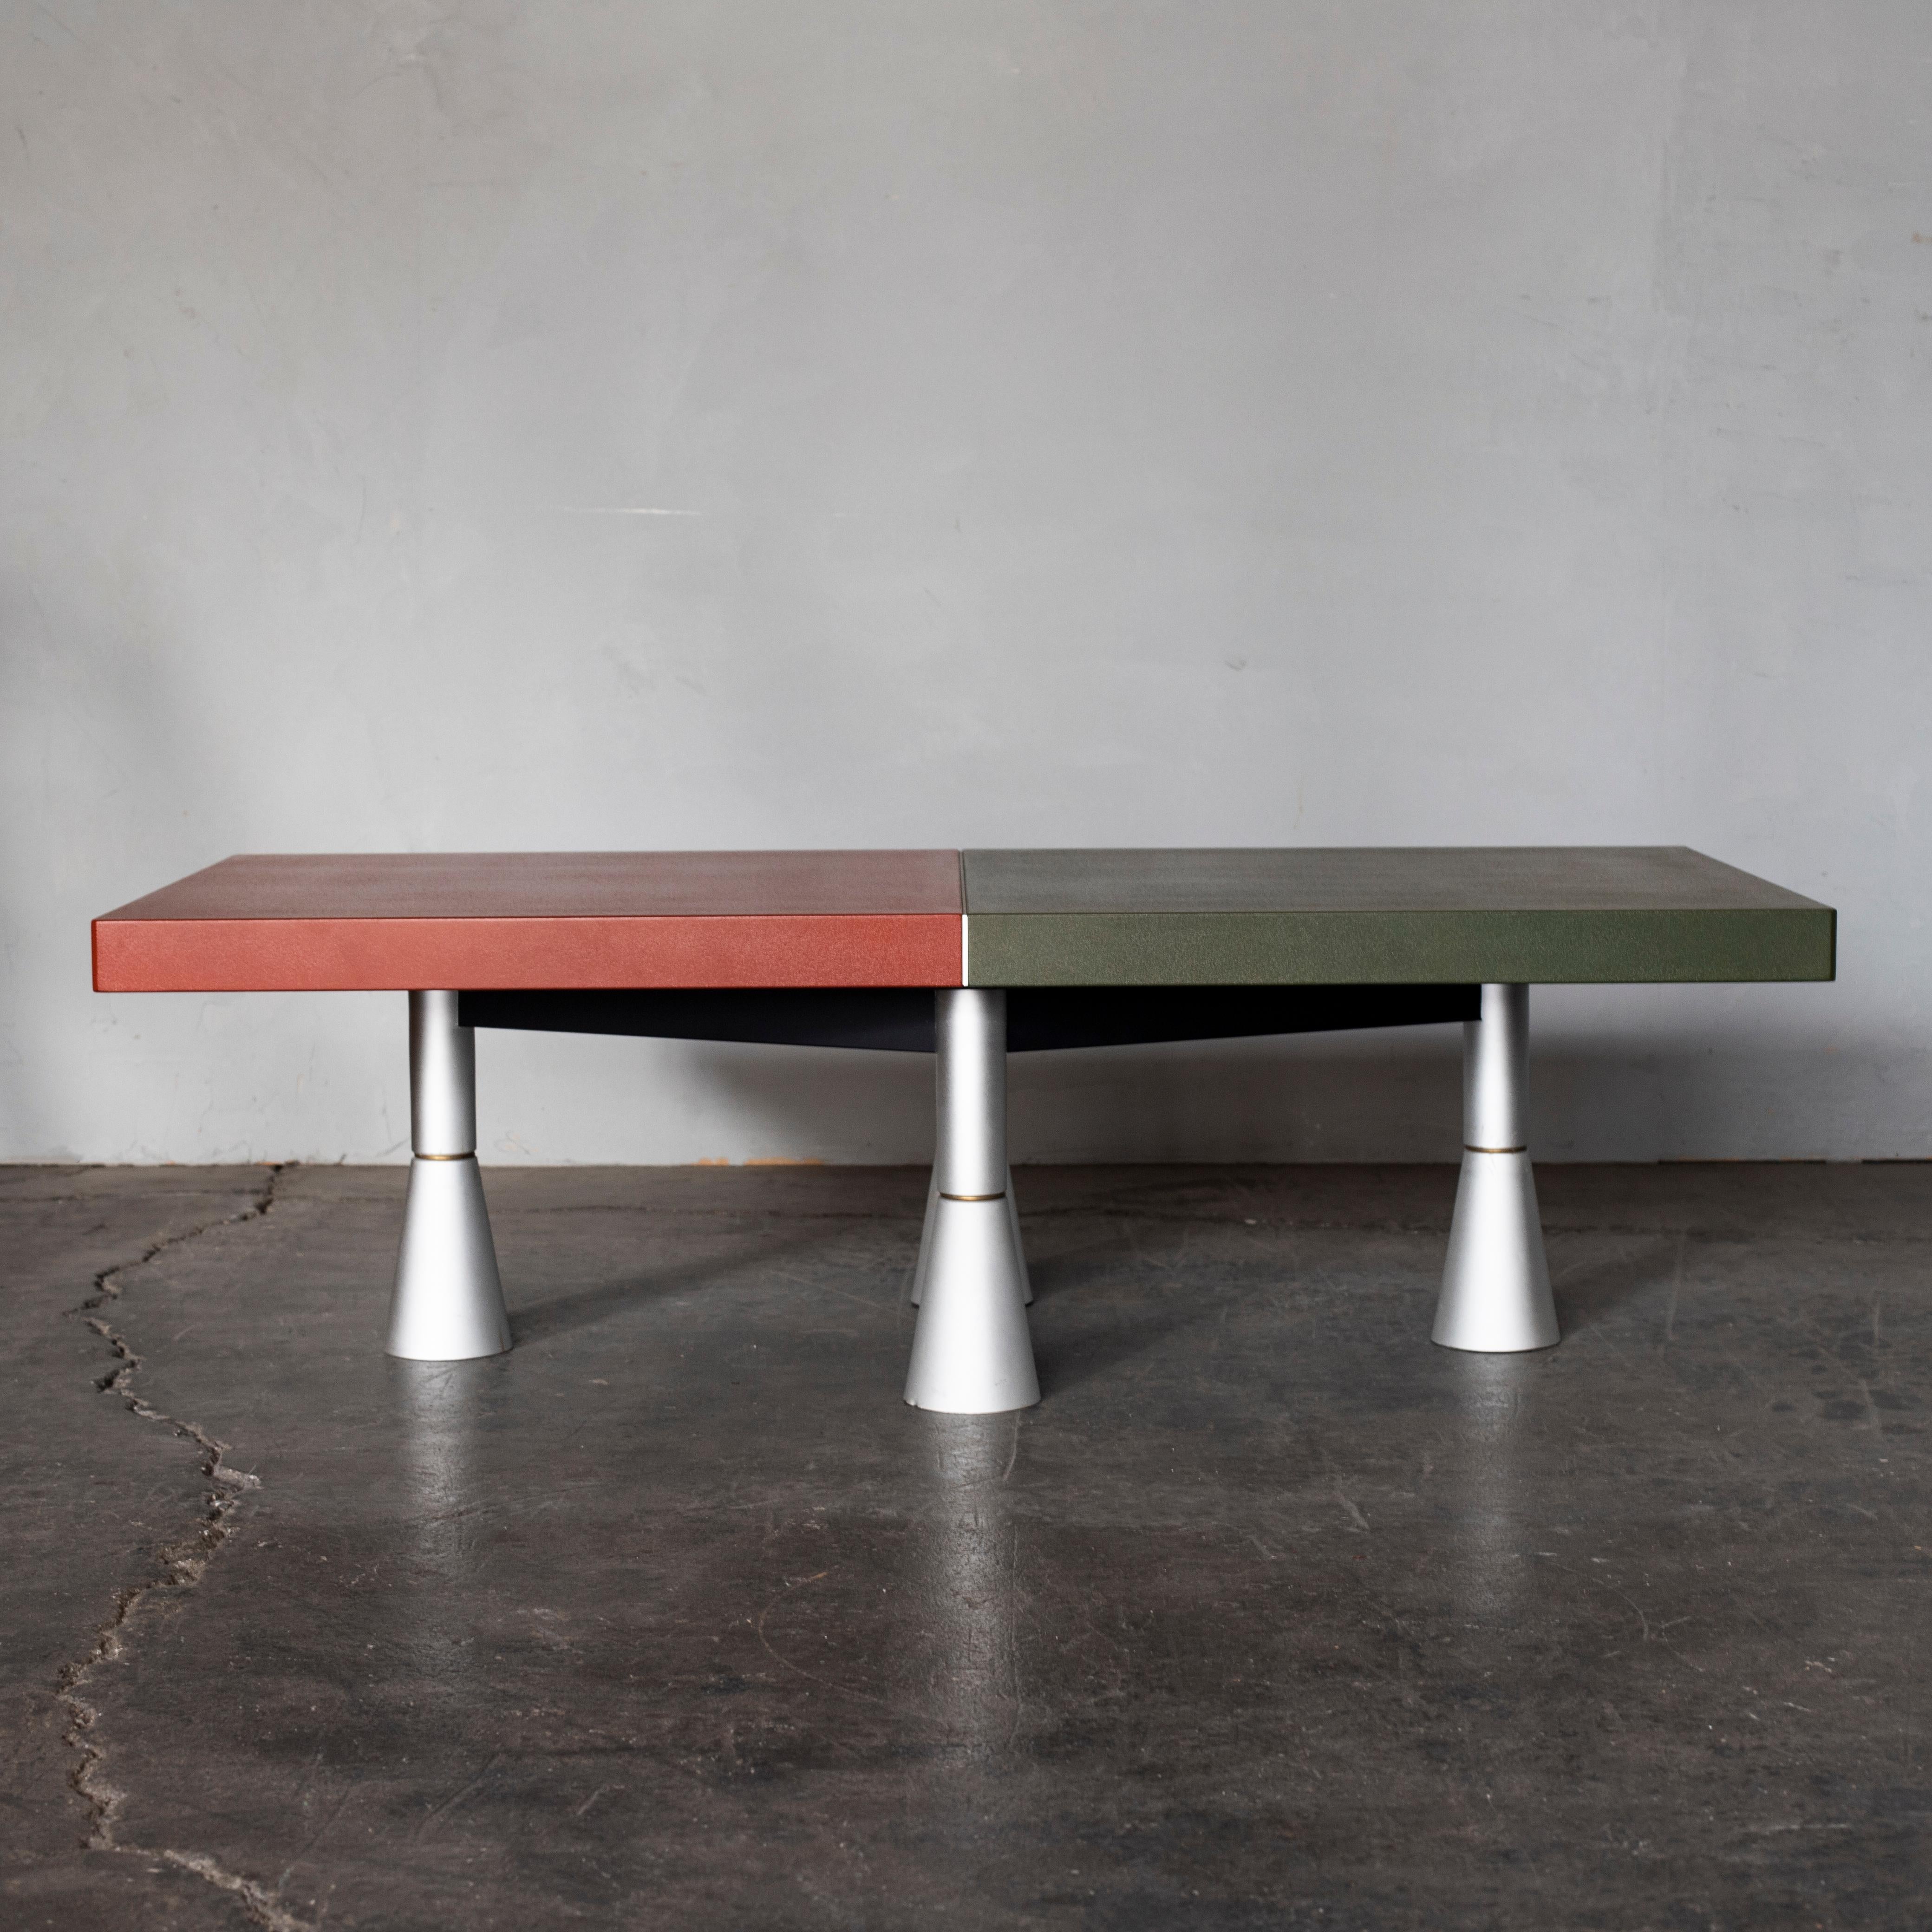 Prototype of the tables that were designed by Kisho Kurokawa for his work, Roppongi Prince Hotel in 1980s.
Urushi lacquered wood and aluminum.
The table top and the legs are disassembled.